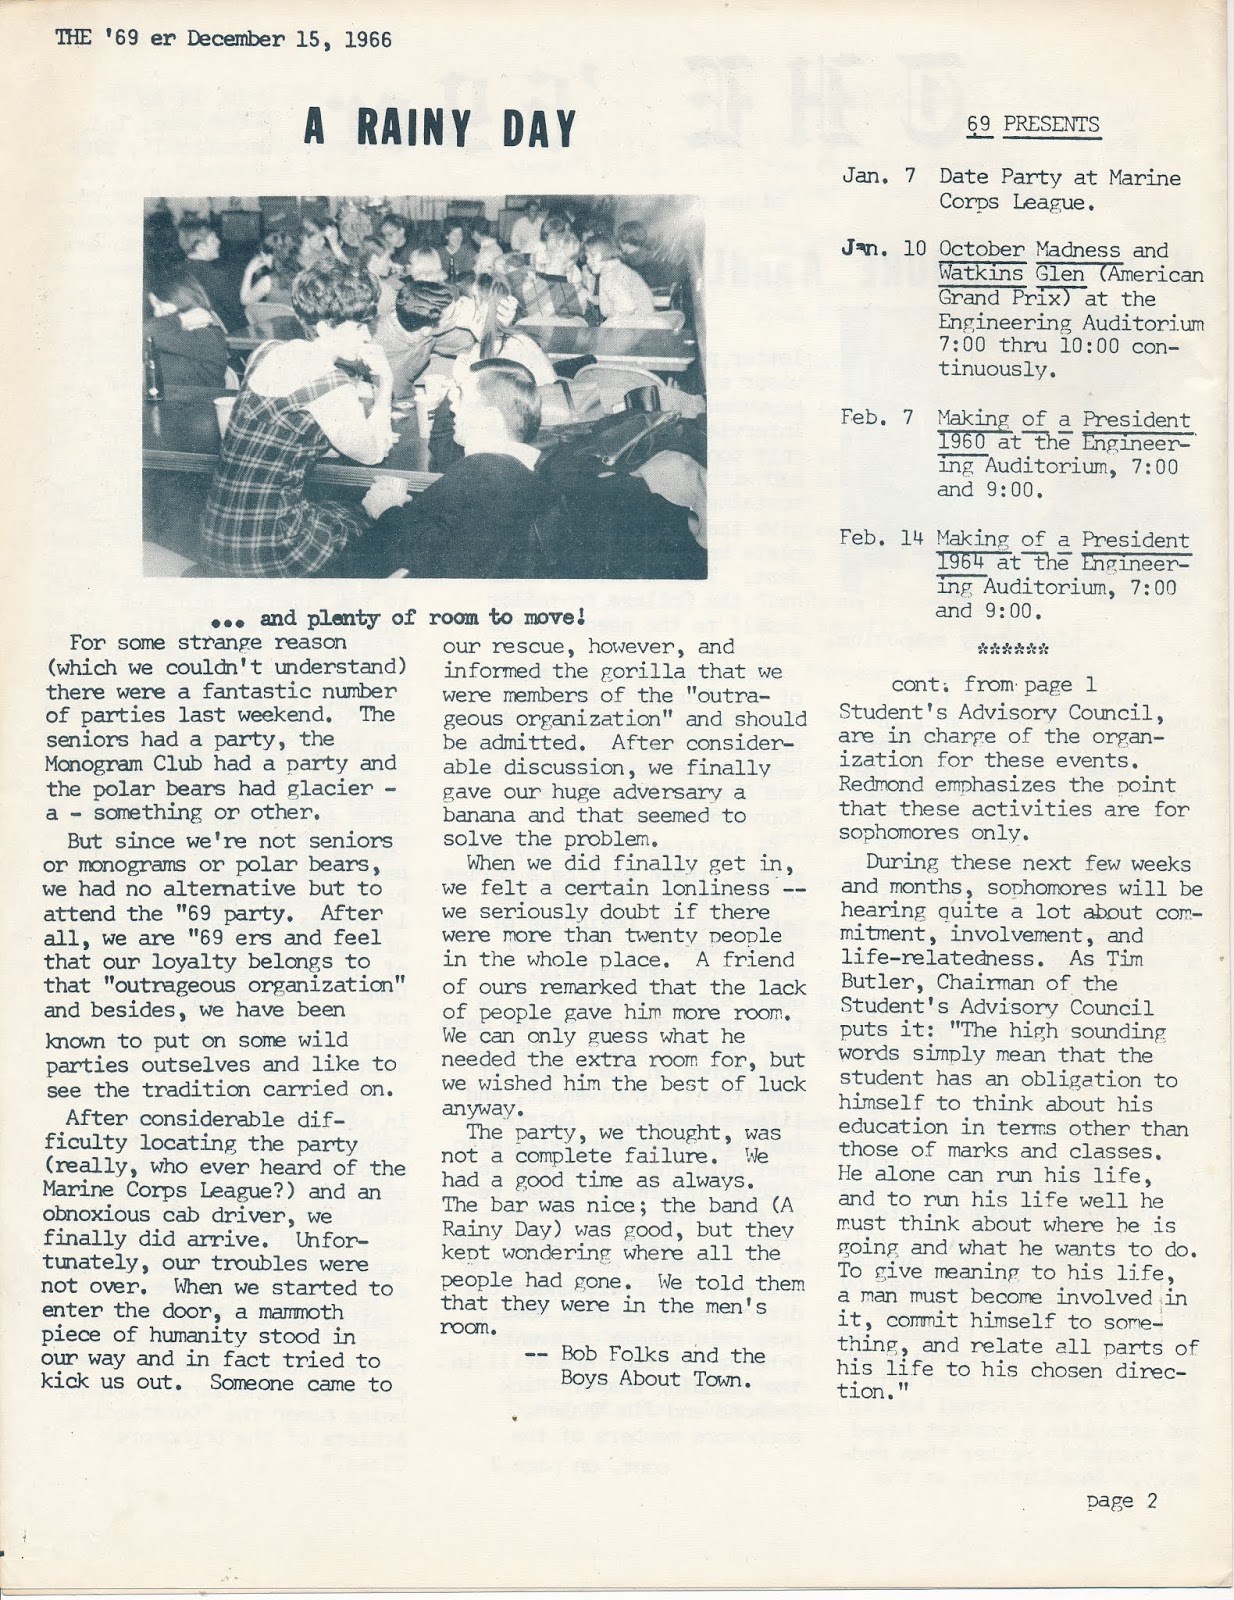 The University of Notre Dame Class of 1969 Blog March 2019 image